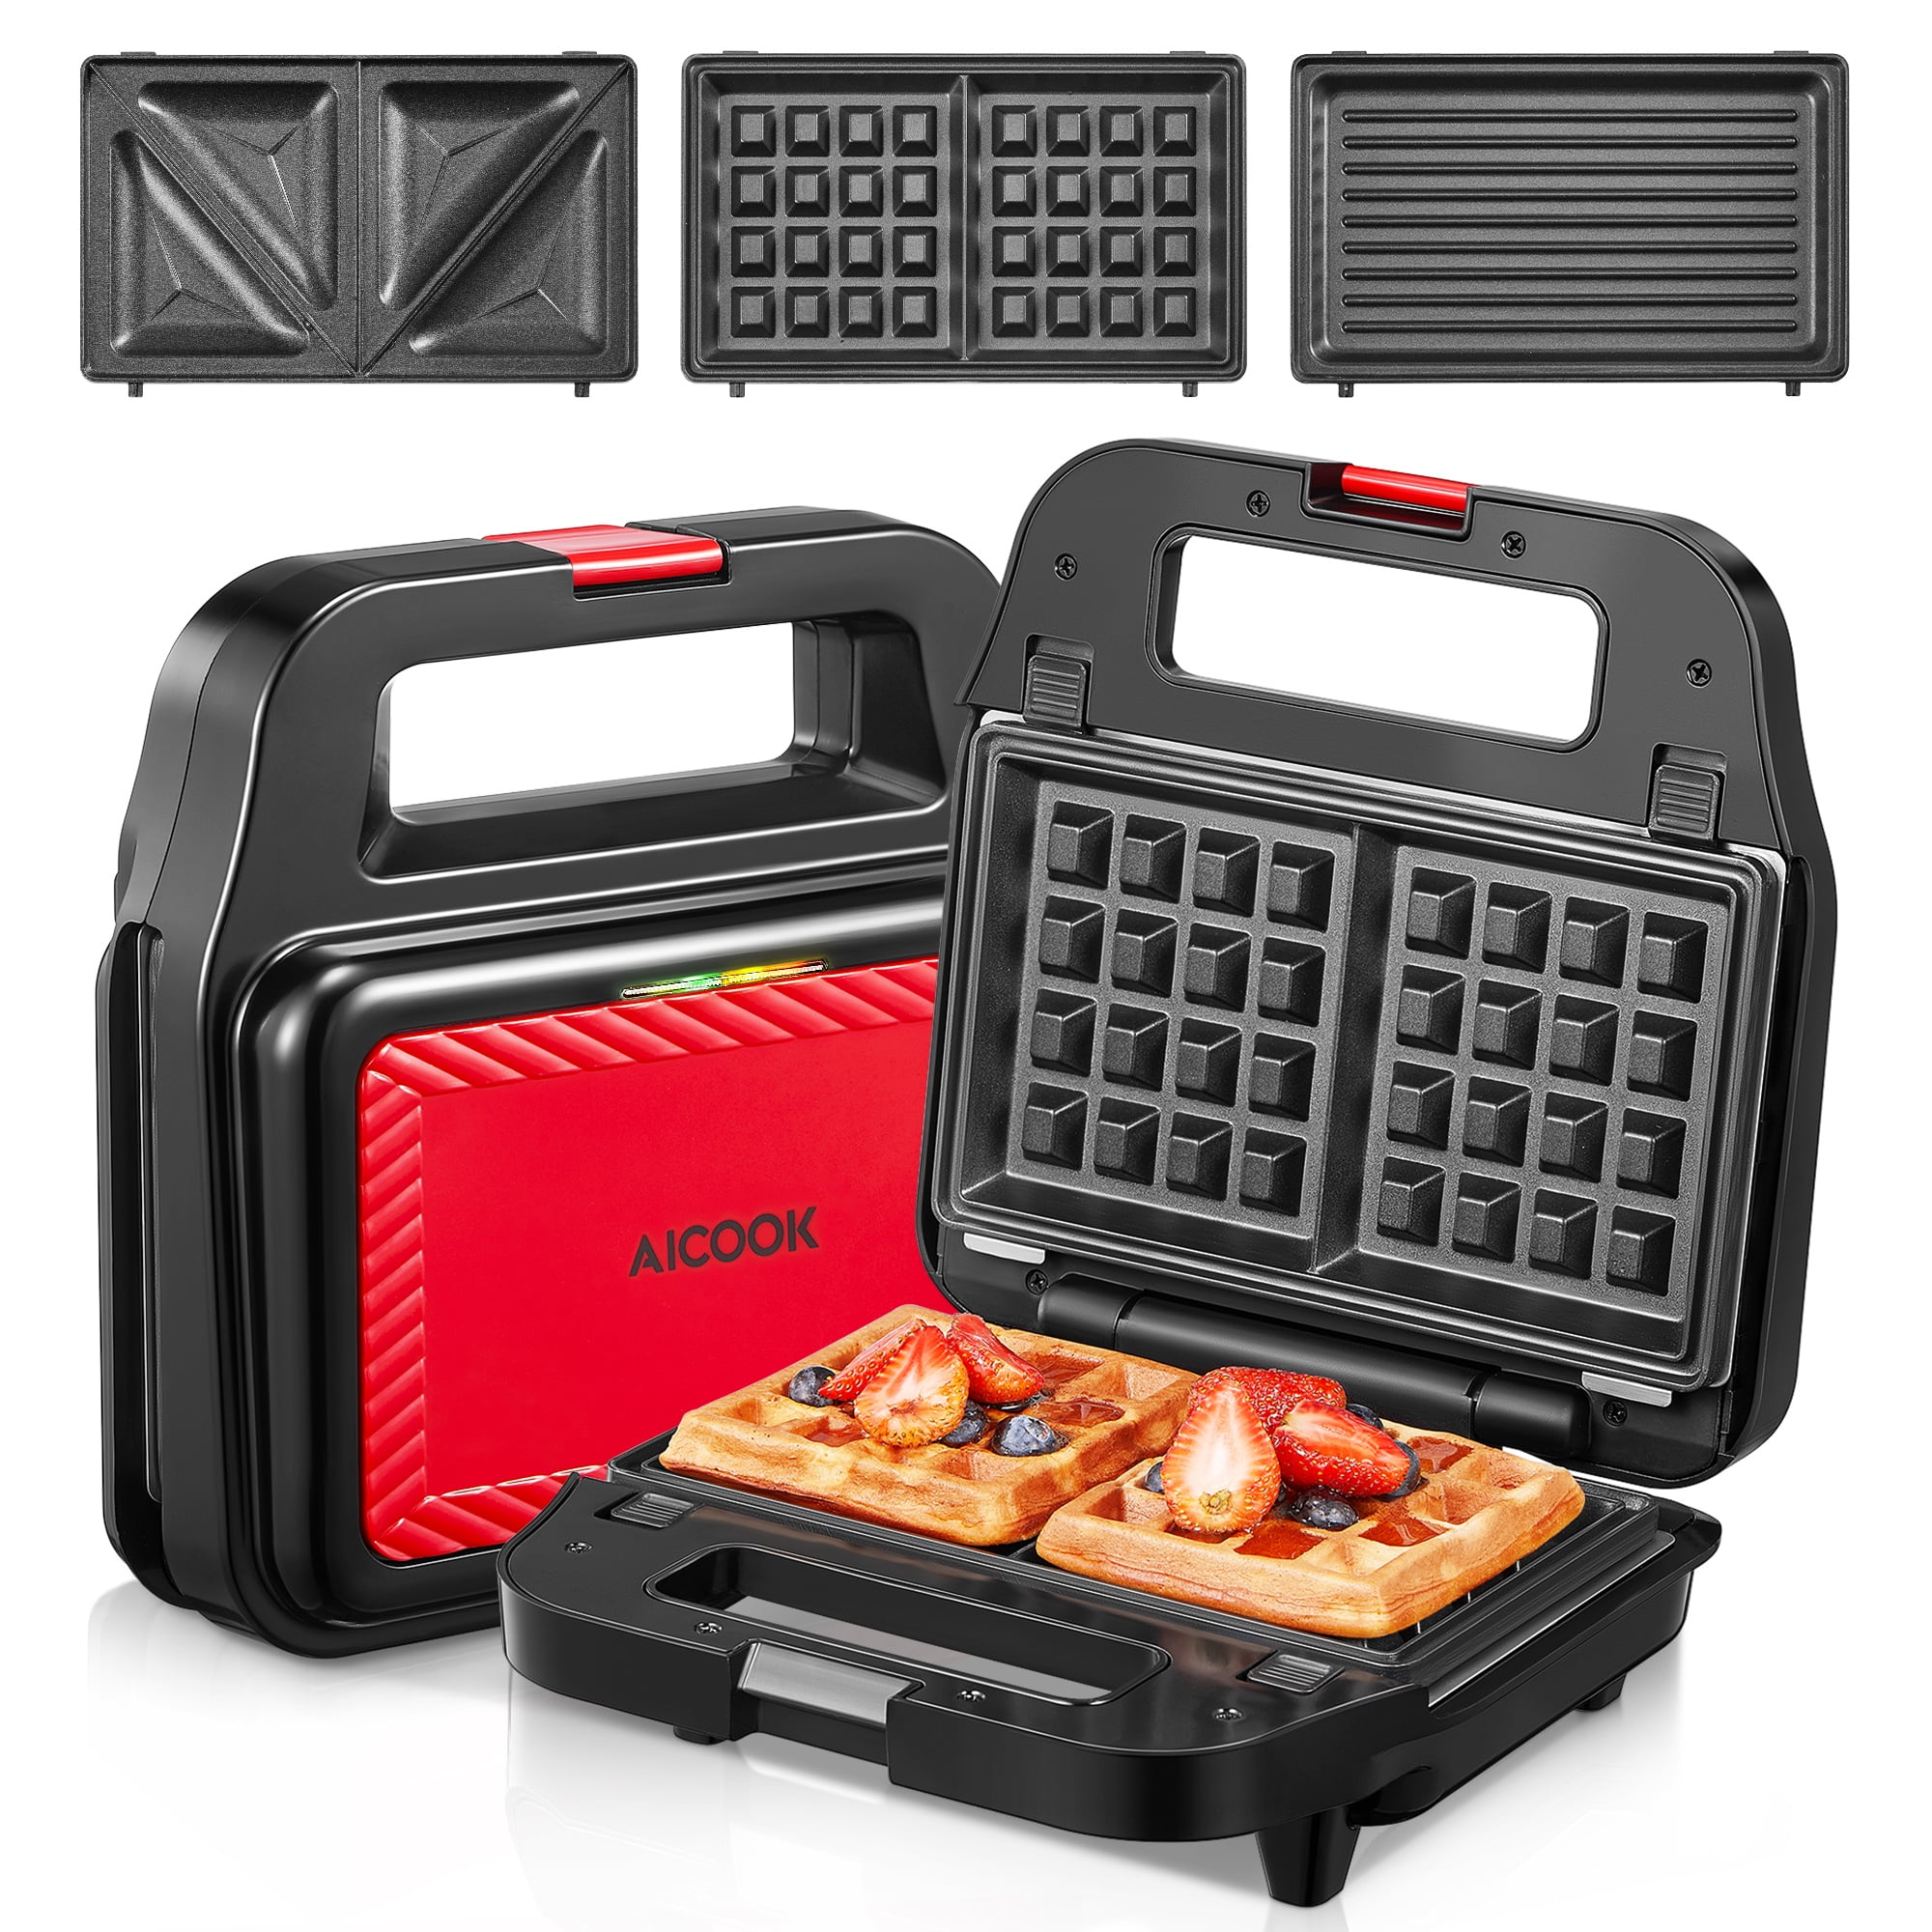 Waffle Maker 3 in 1 Deep Fill Sandwich Toasters & Panini Presses with Non-Stick Plates Easy to Clean Dishwasher-Safe Sandwich Machine Maker with 3 Interchangeable Plates Black